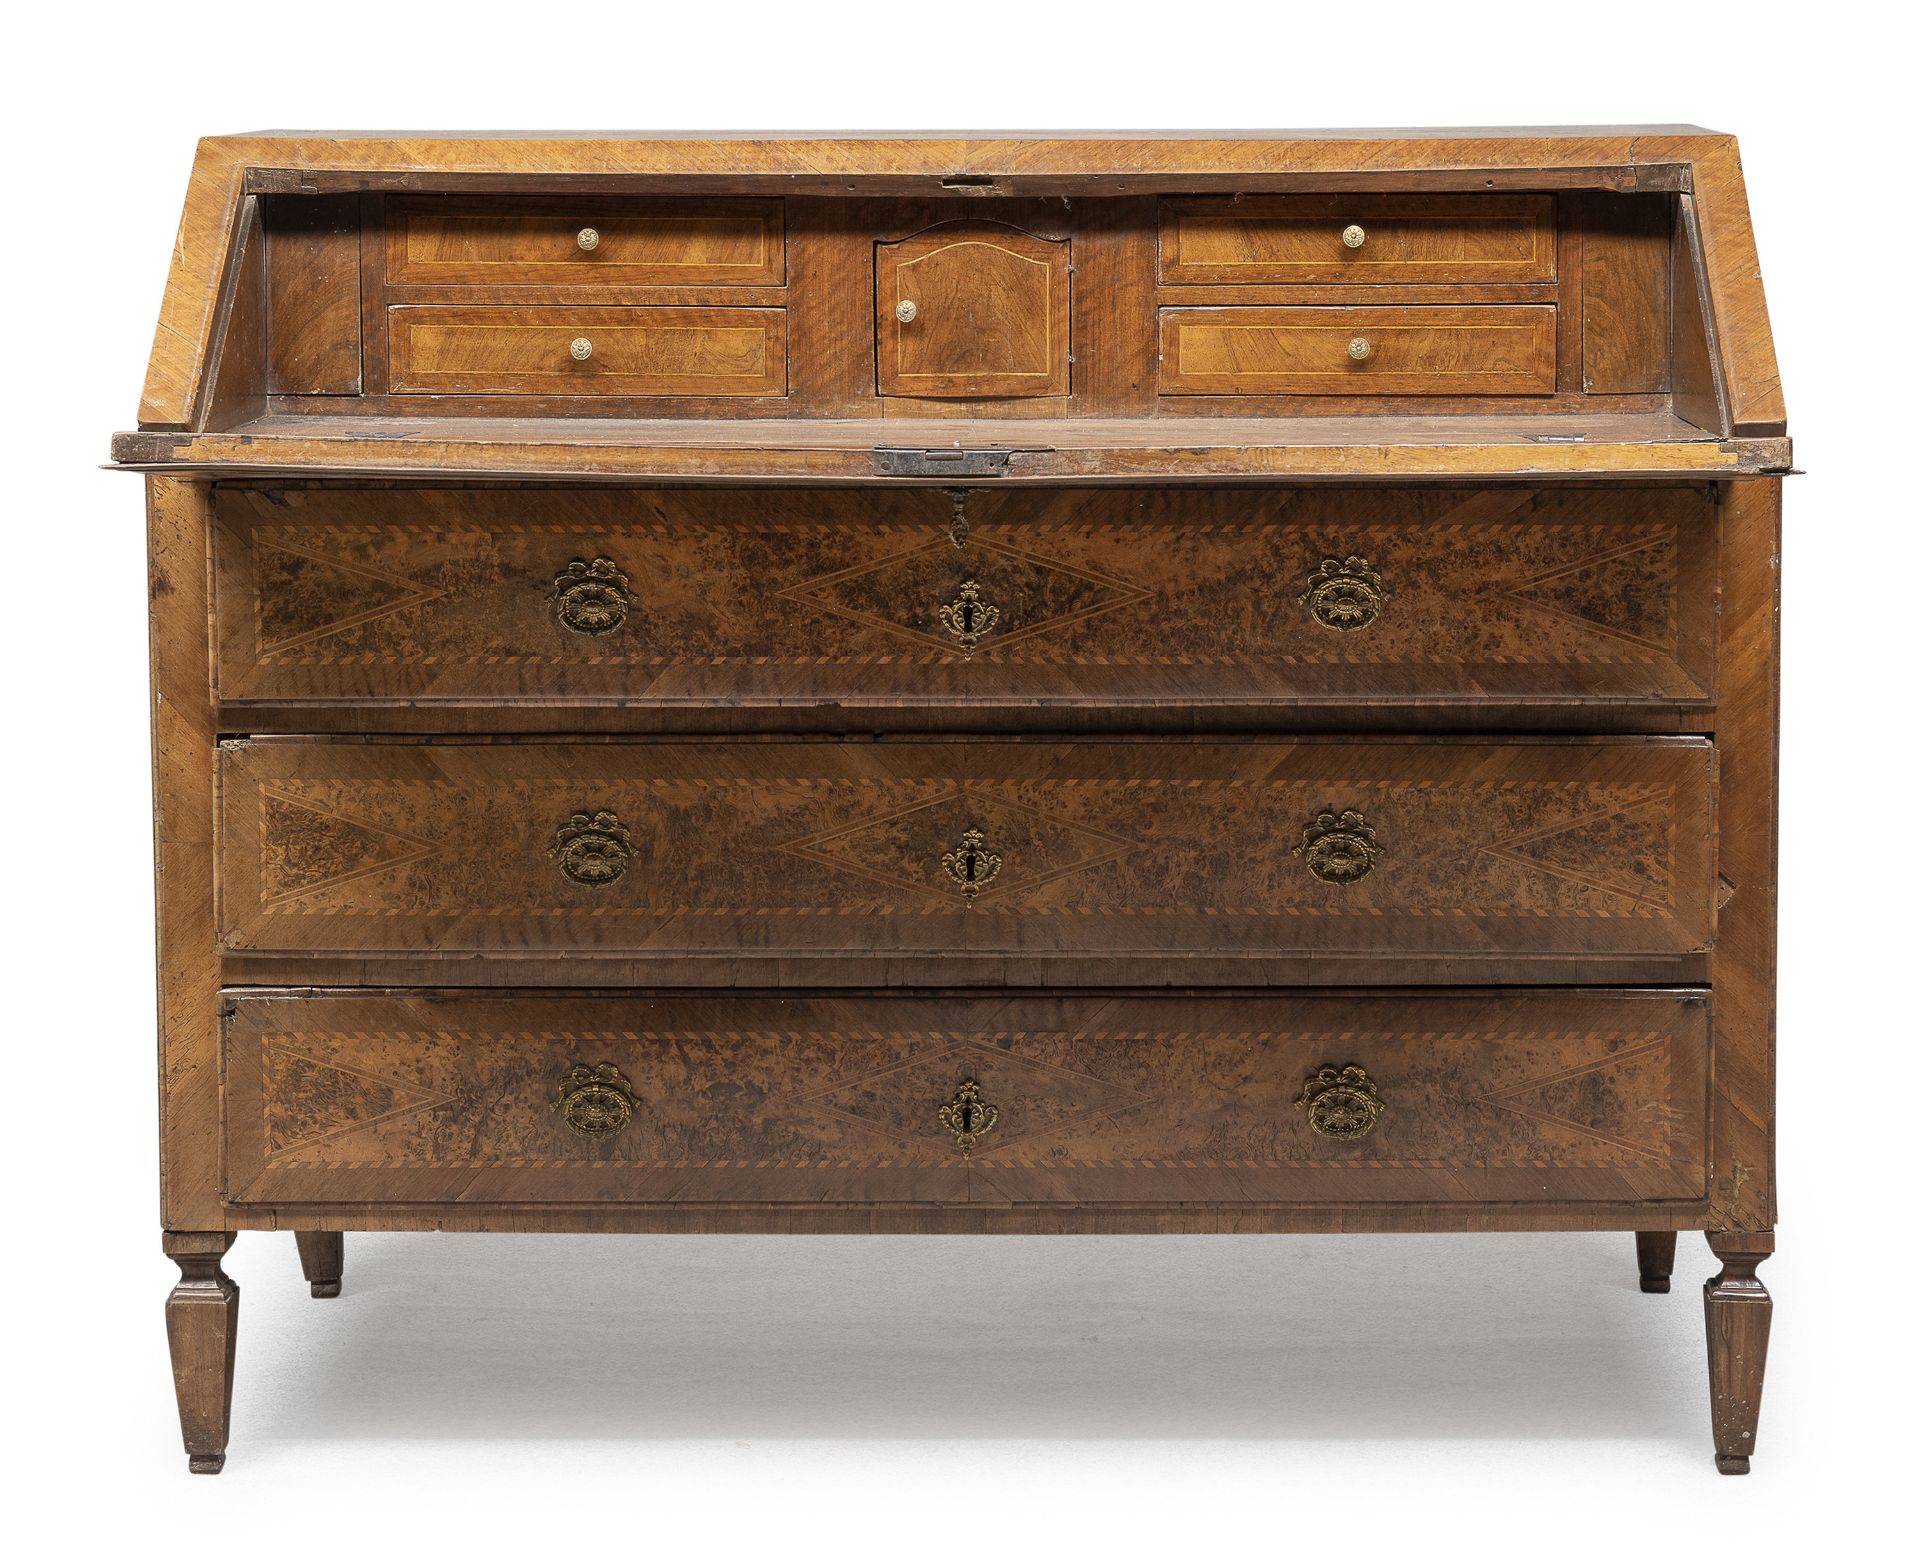 BUREAU IN WALNUT AND TUJA CENTRAL ITALY LATE 18th CENTURY - Image 2 of 2